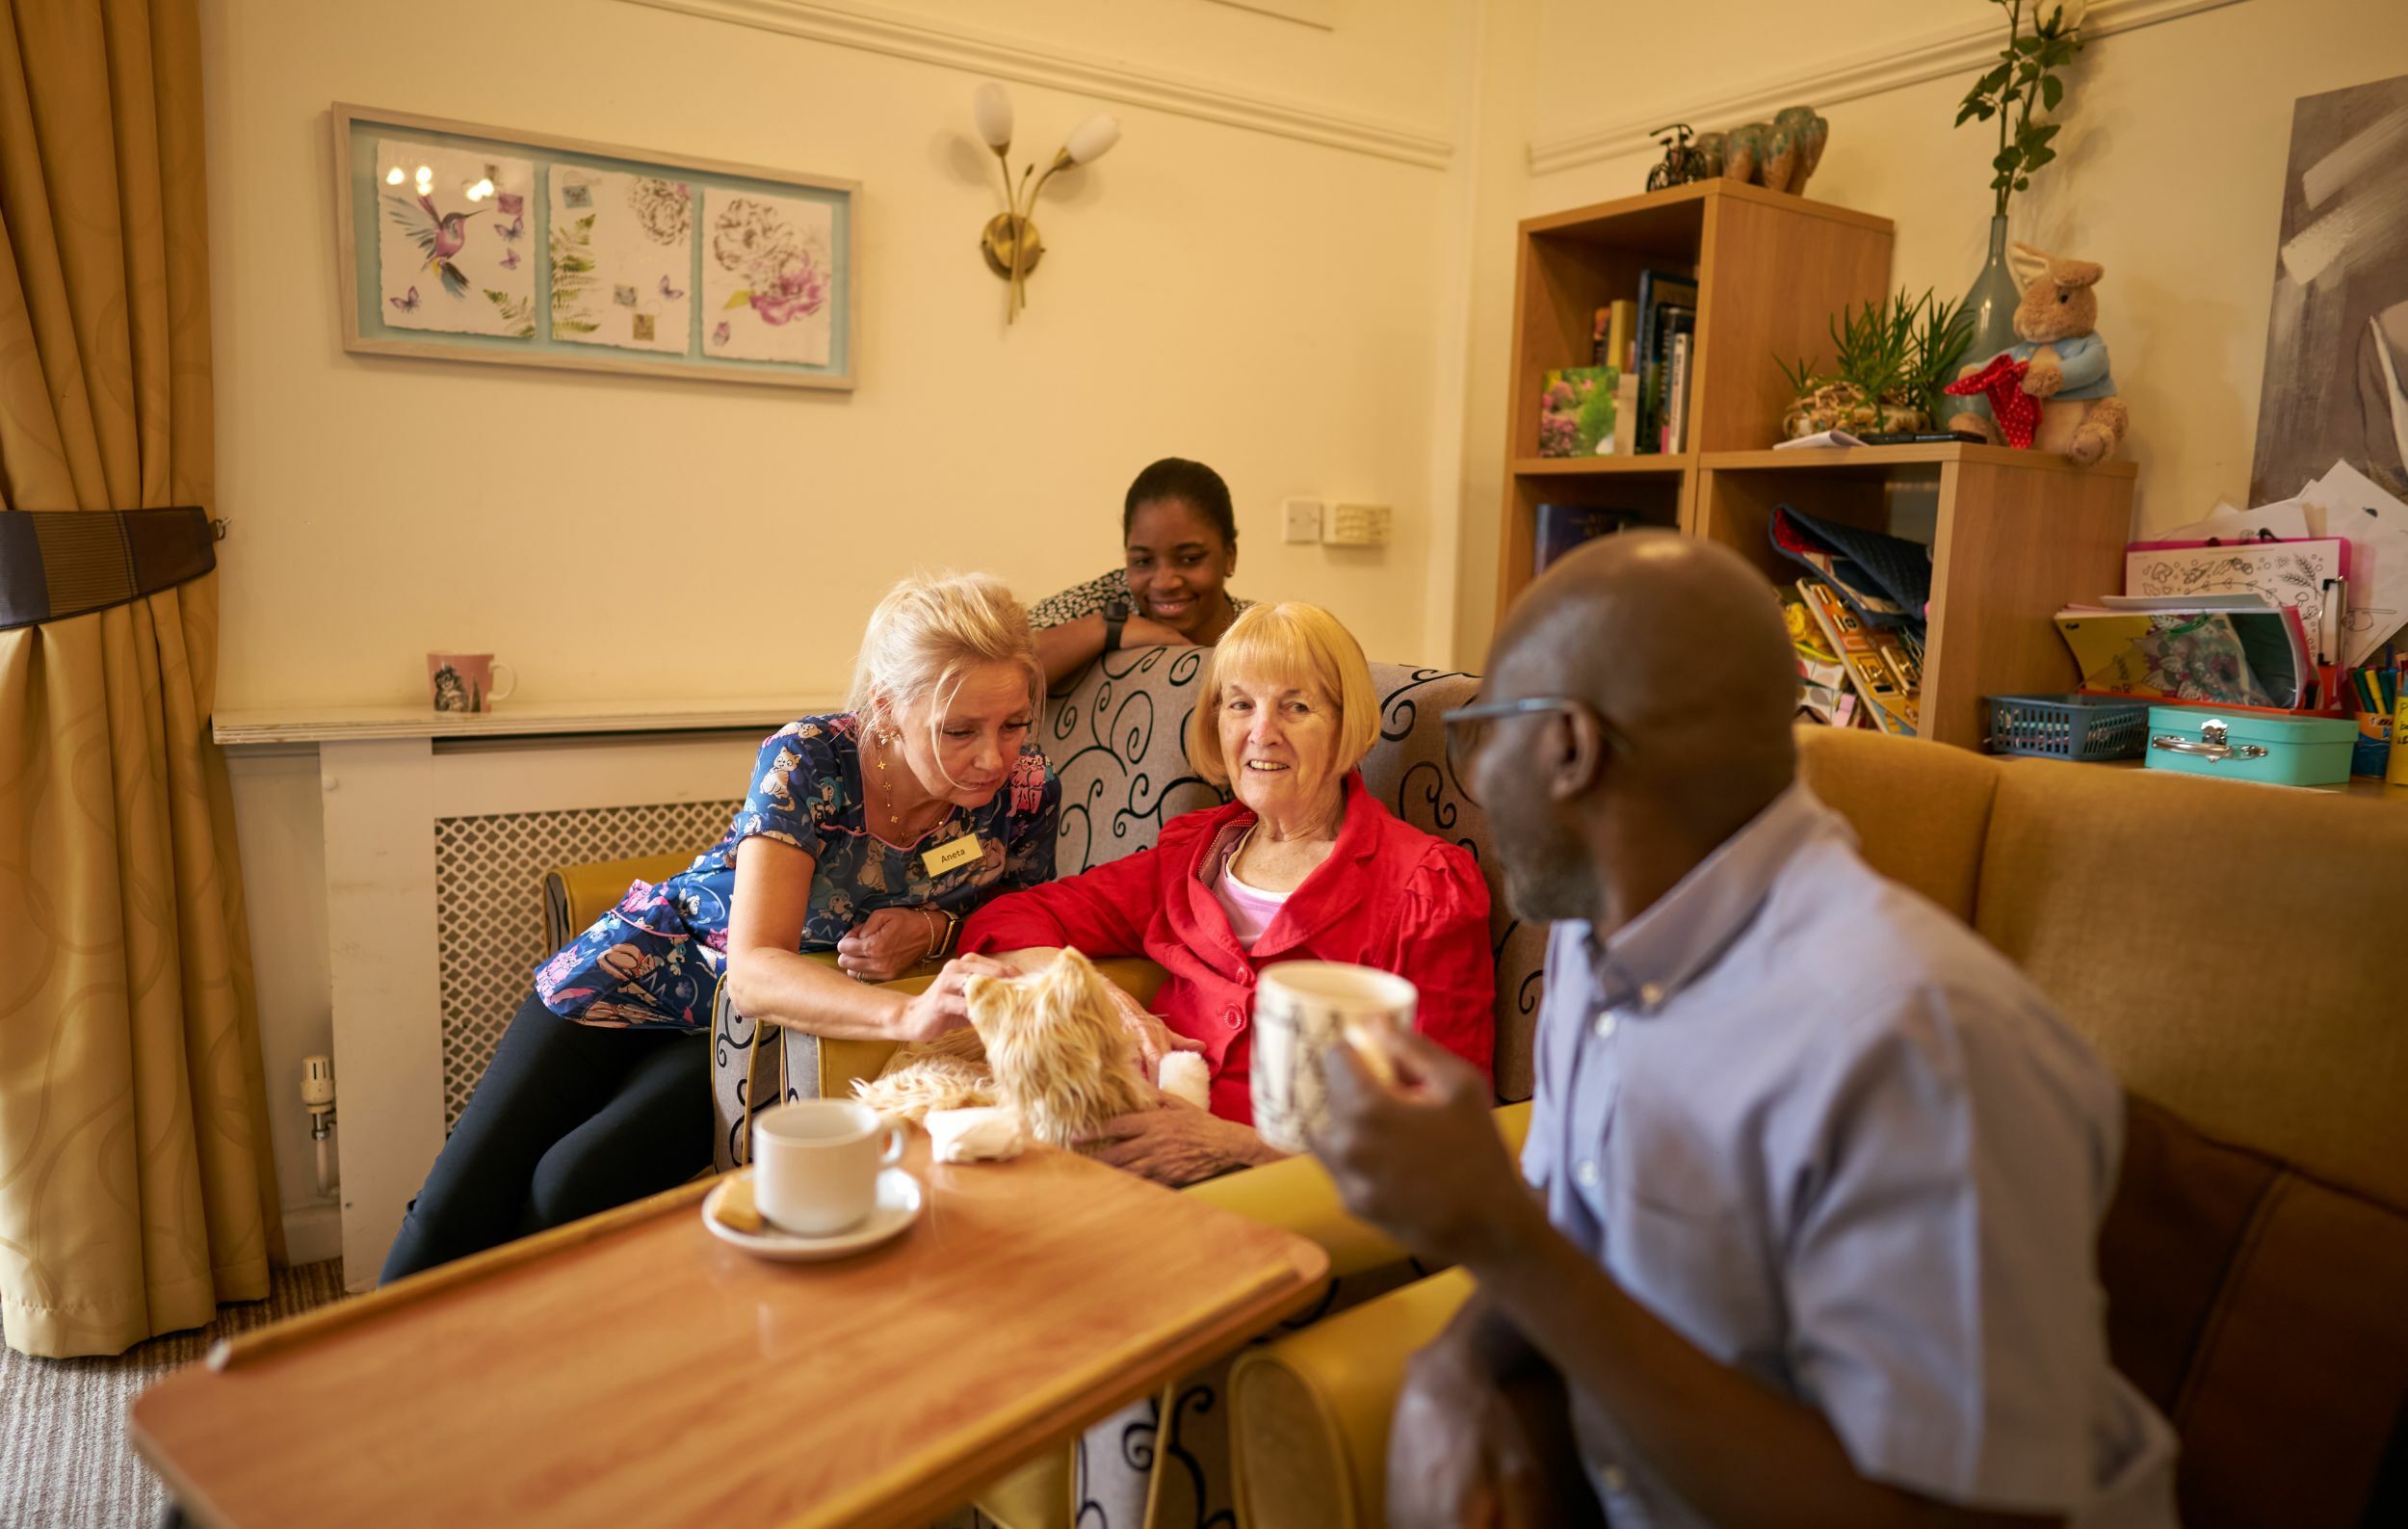 Reviews of Pilgrims' Friend Society care homes